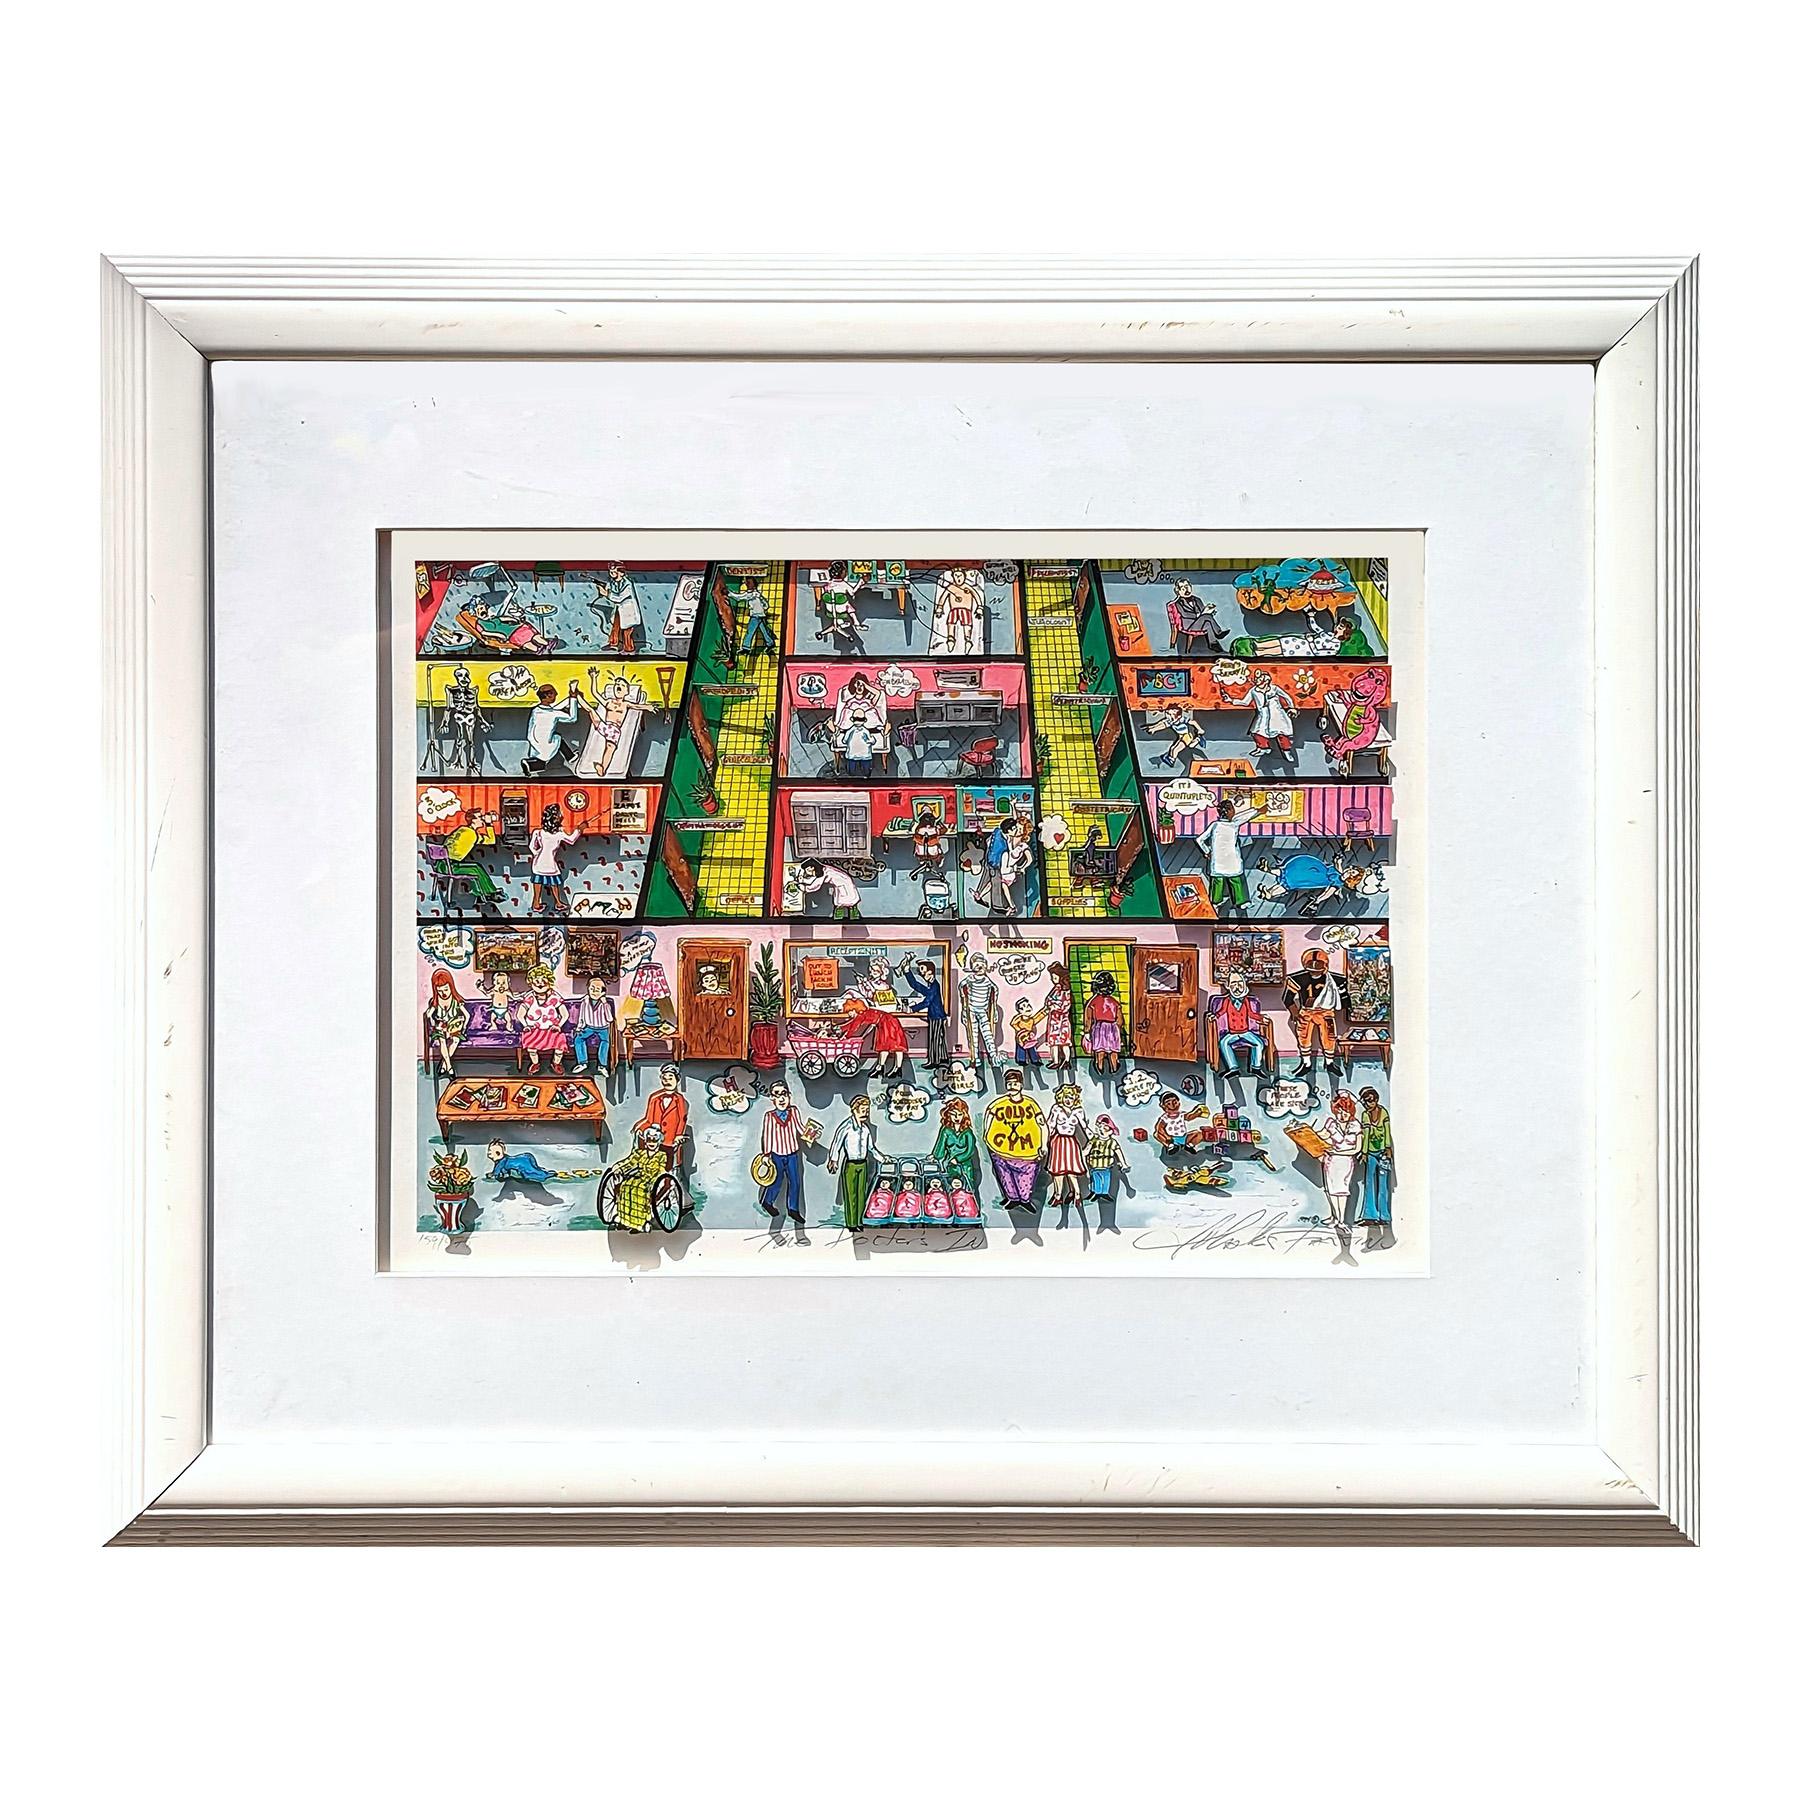 Modern pop art 3 dimensional silkscreen serigraph by contemporary artist Charles Fazzino. The work features a variety of vignettes that have been combined to create a larger hospital scene with pop culture references hidden throughout. Each piece is